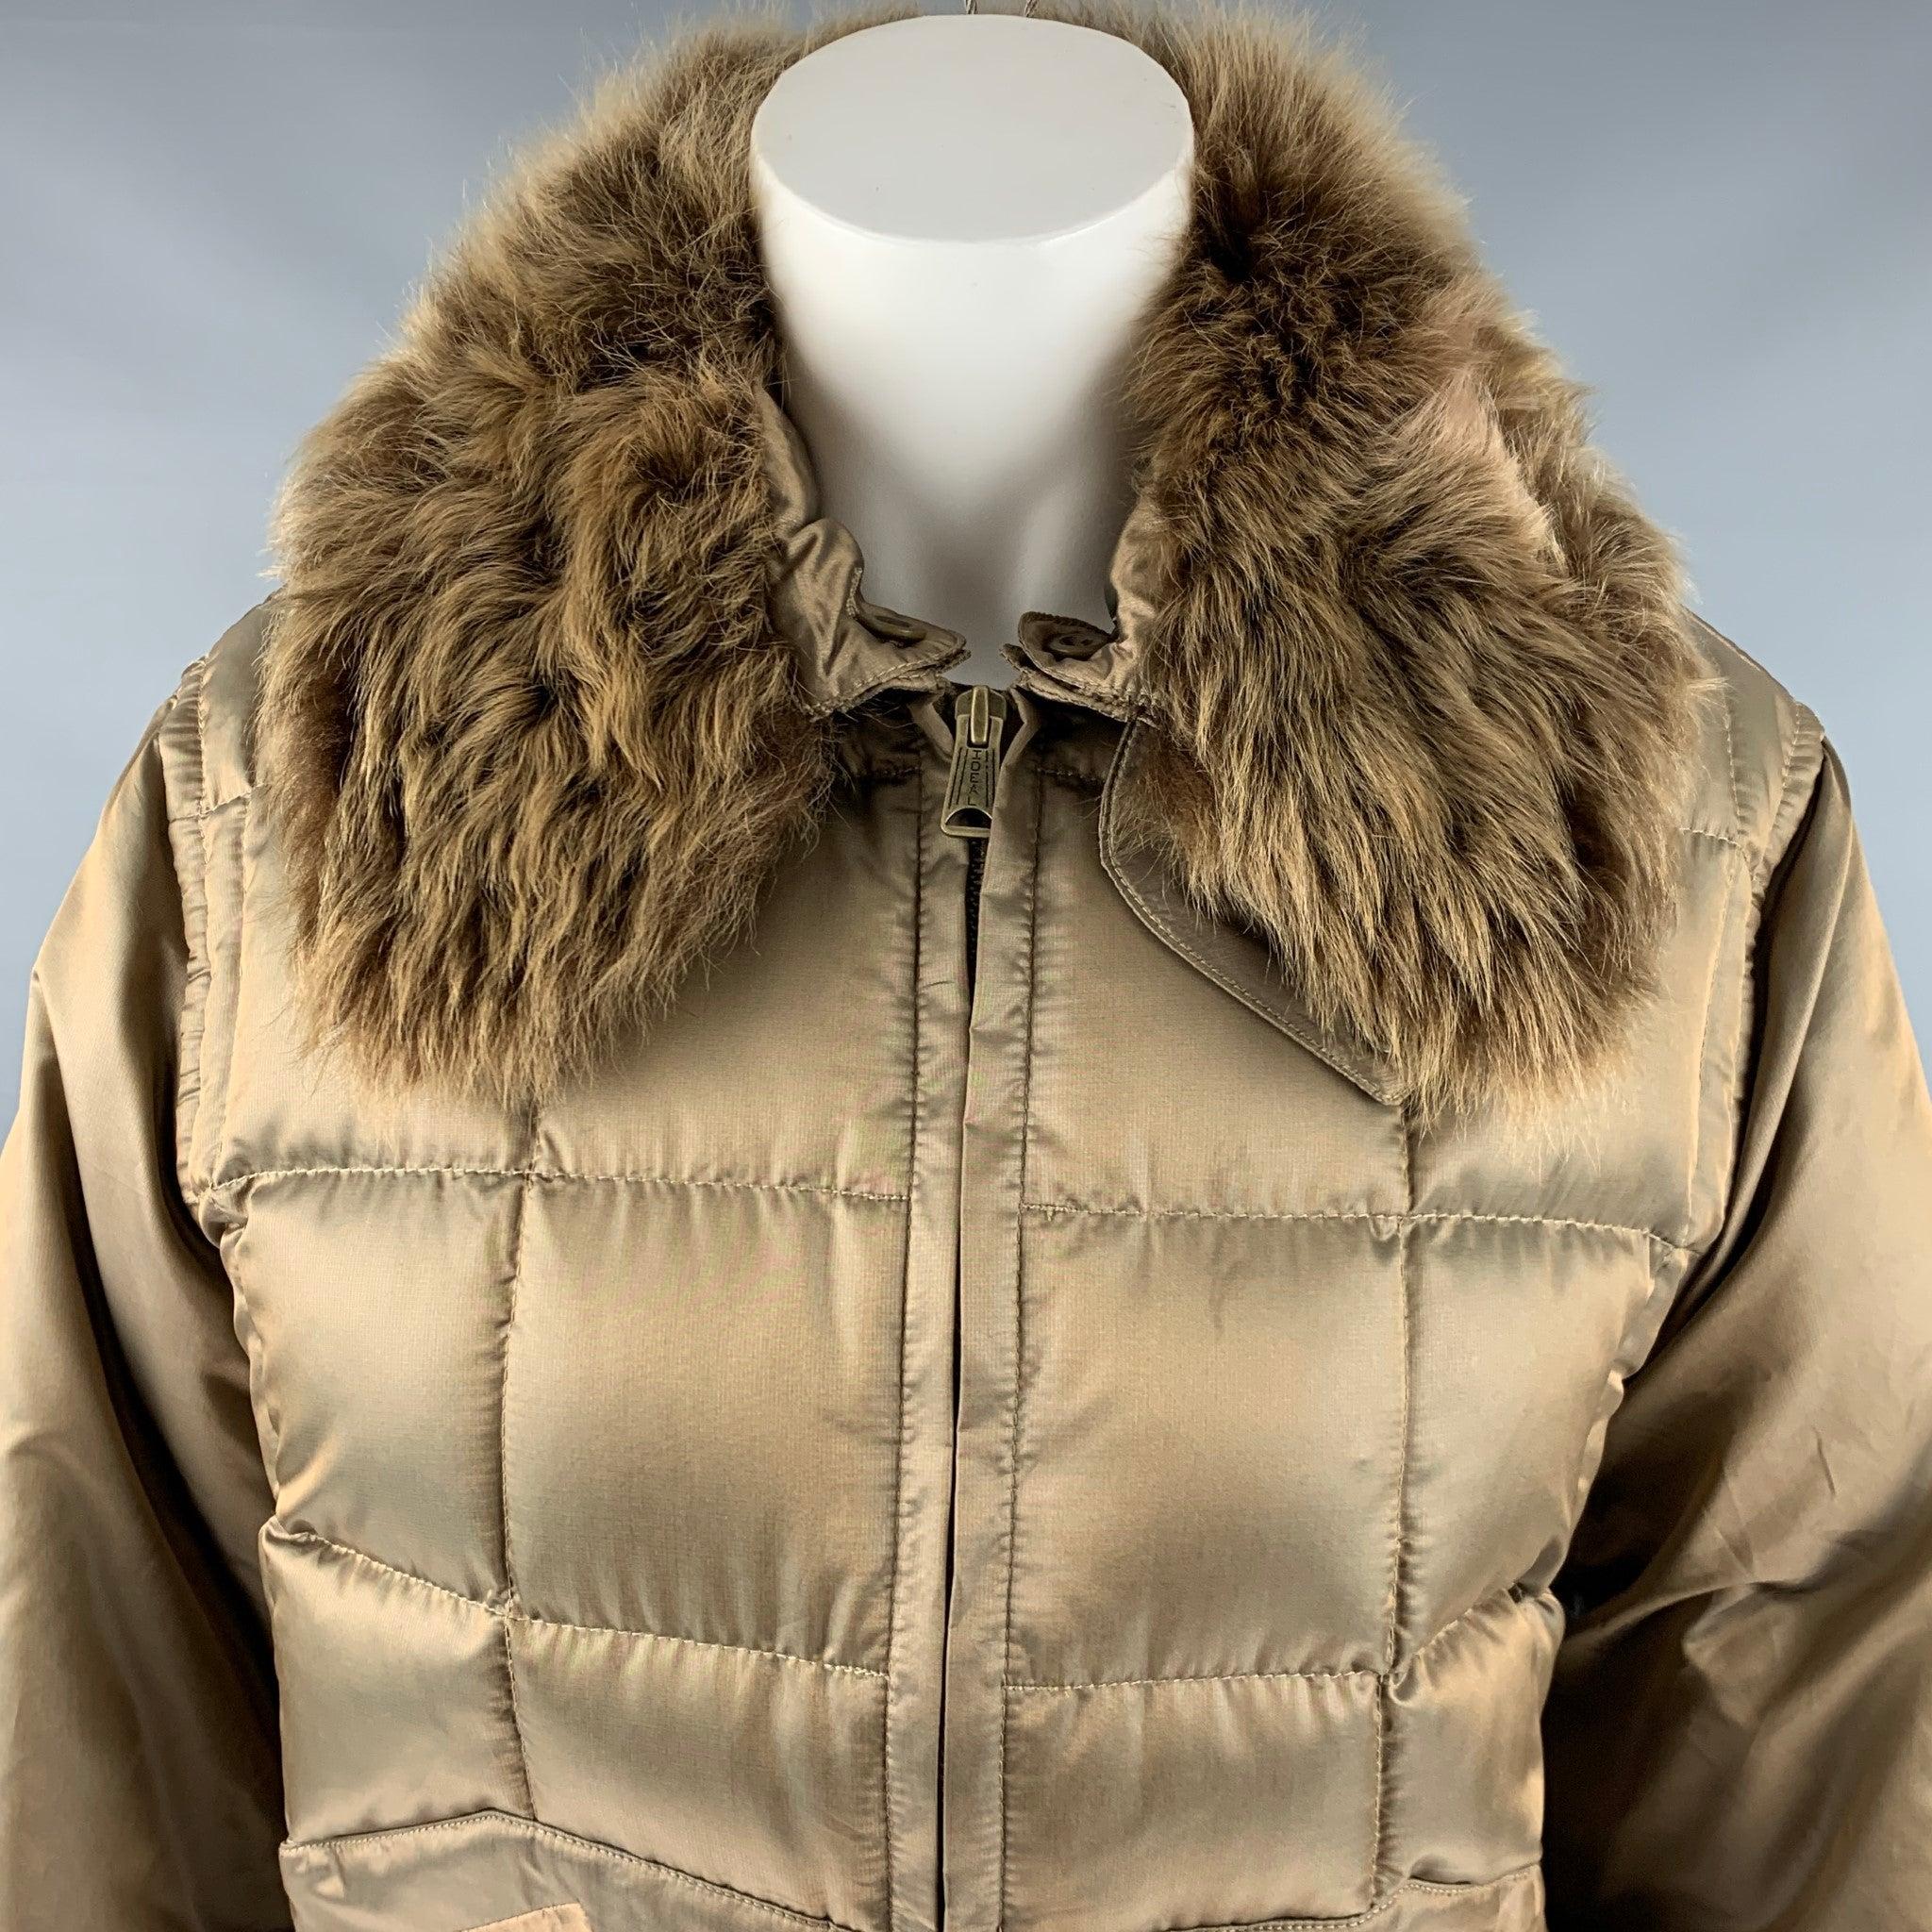 RALPH LAUREN jacket
in an olive green polyester fabric featuring a quilted style, detachable shearling lamb fur collar, cozy duck down filling, and a zip up closure.New with Tags. 

Marked:   L 

Measurements: 
 
Shoulder: 17 inches  Bust: 42 inches